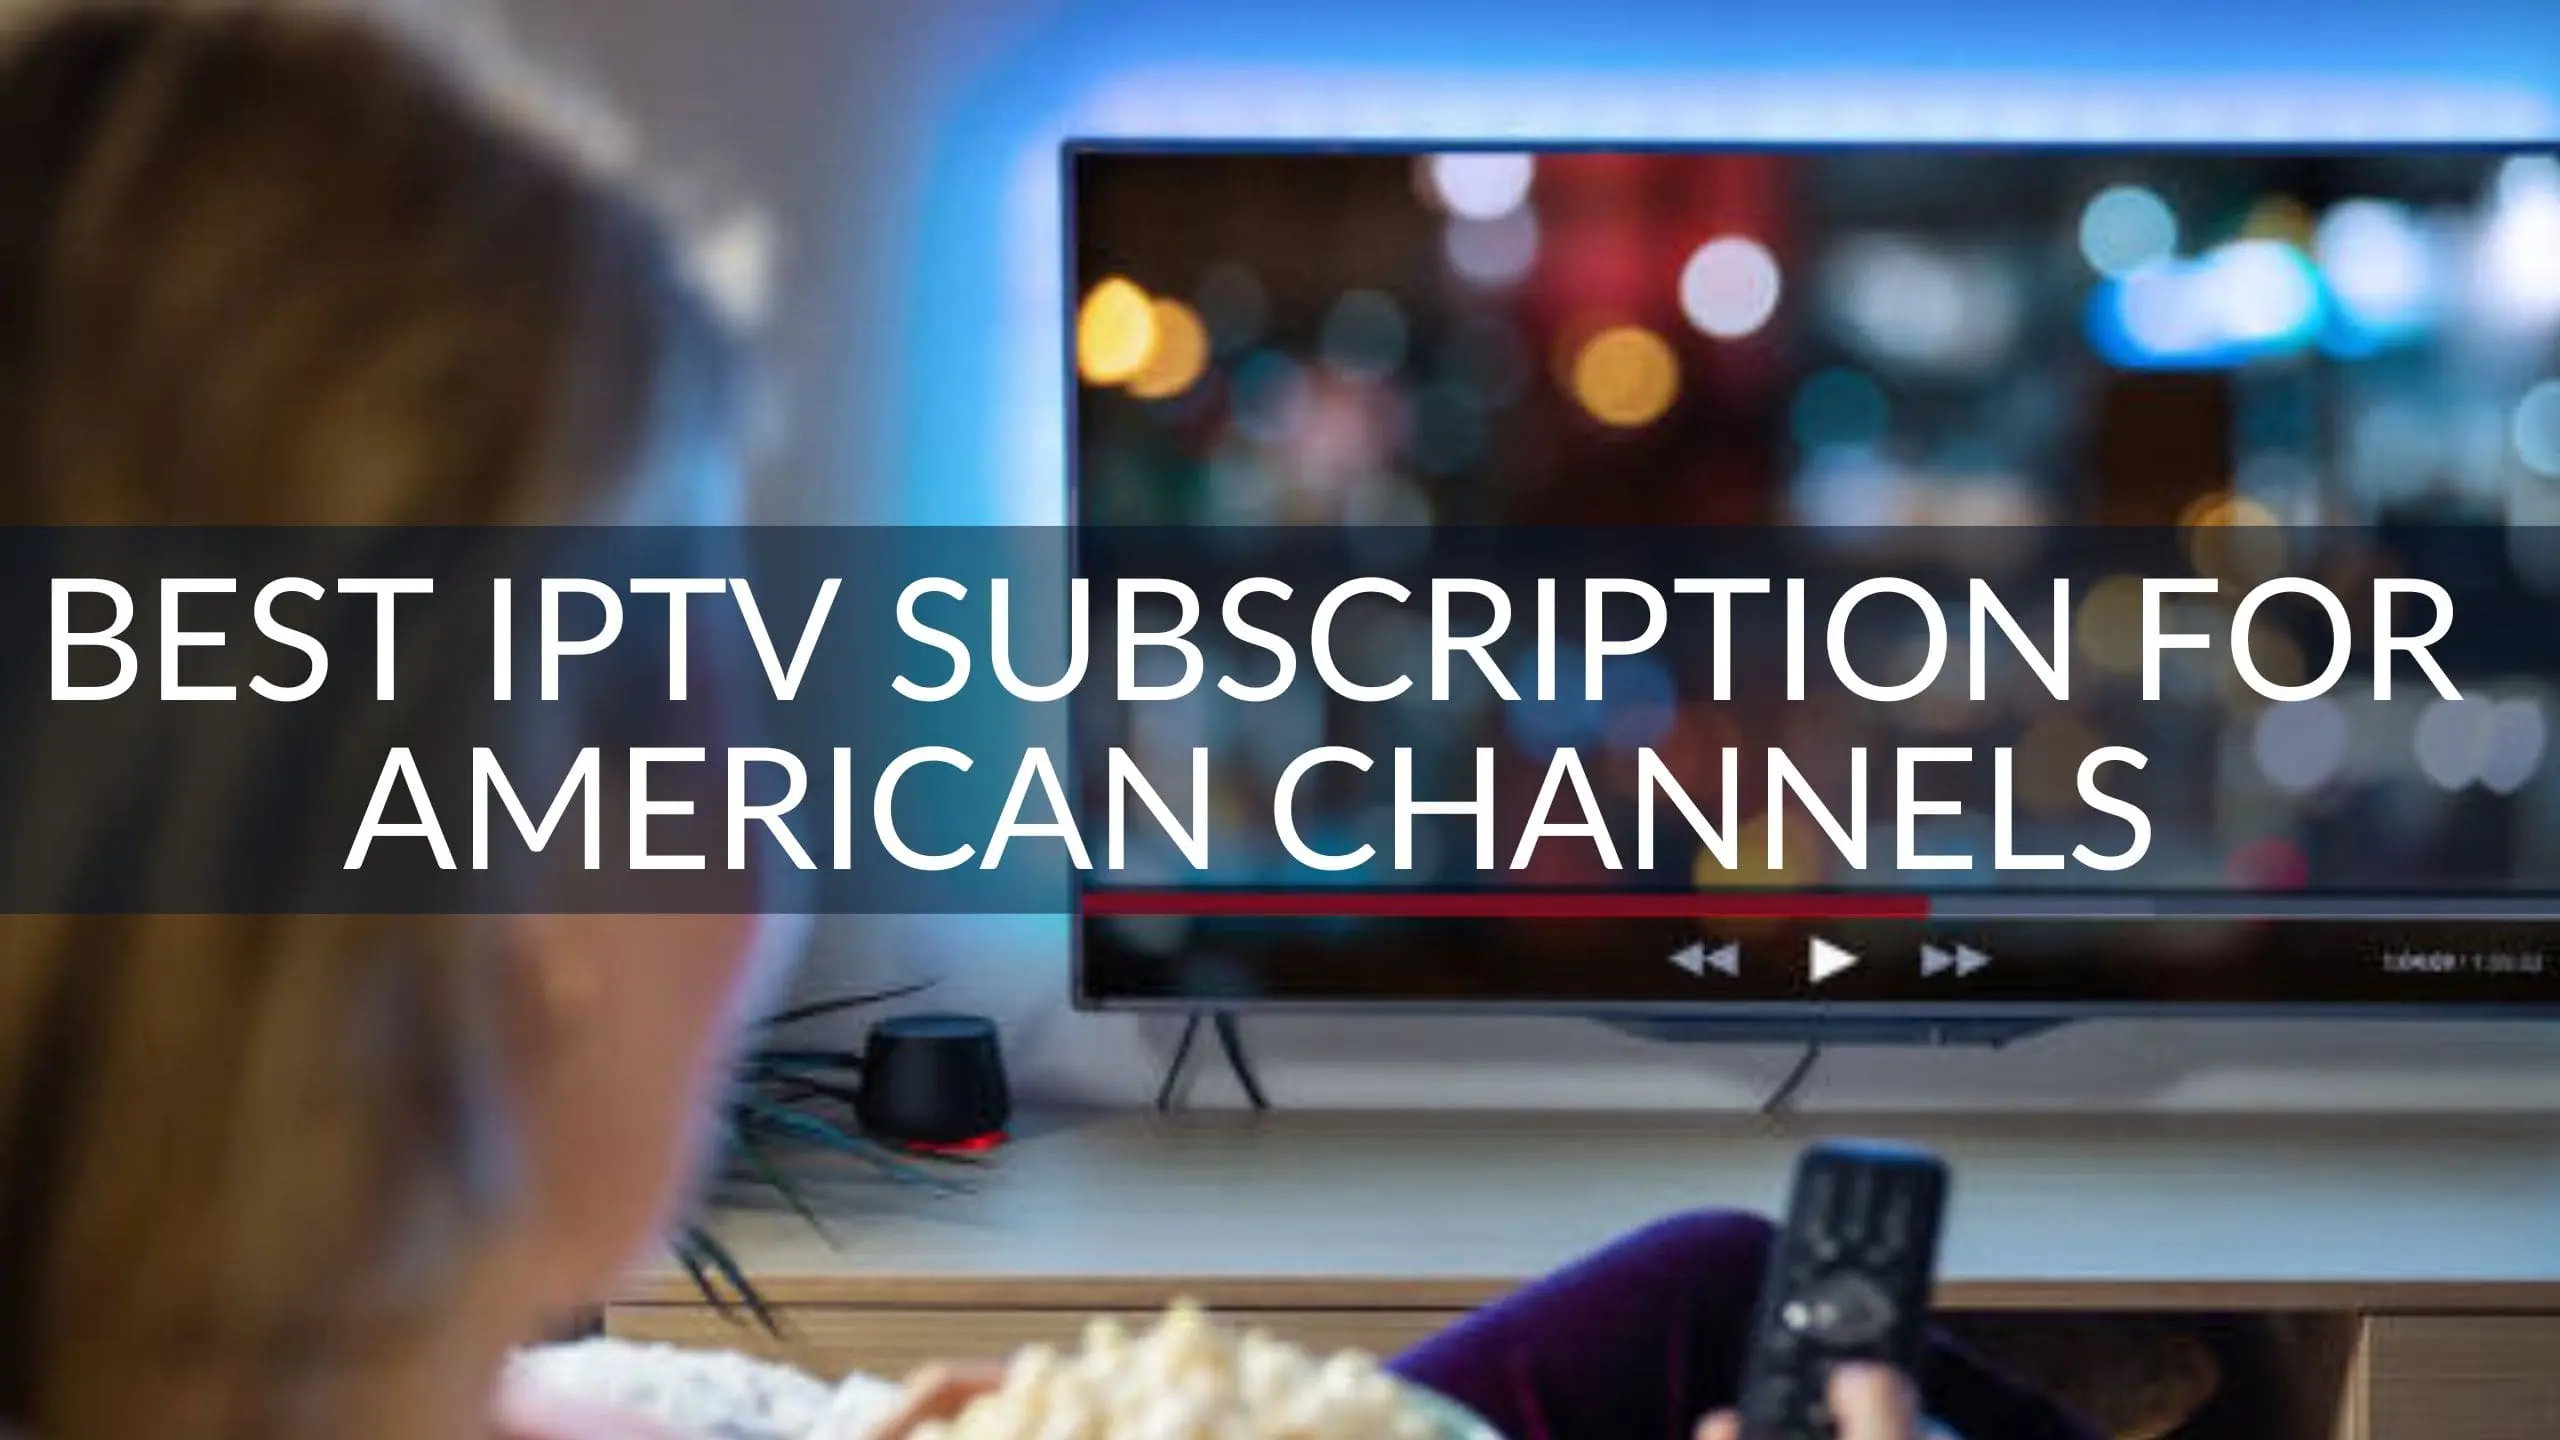 Best IPTV Subscription for American Channels